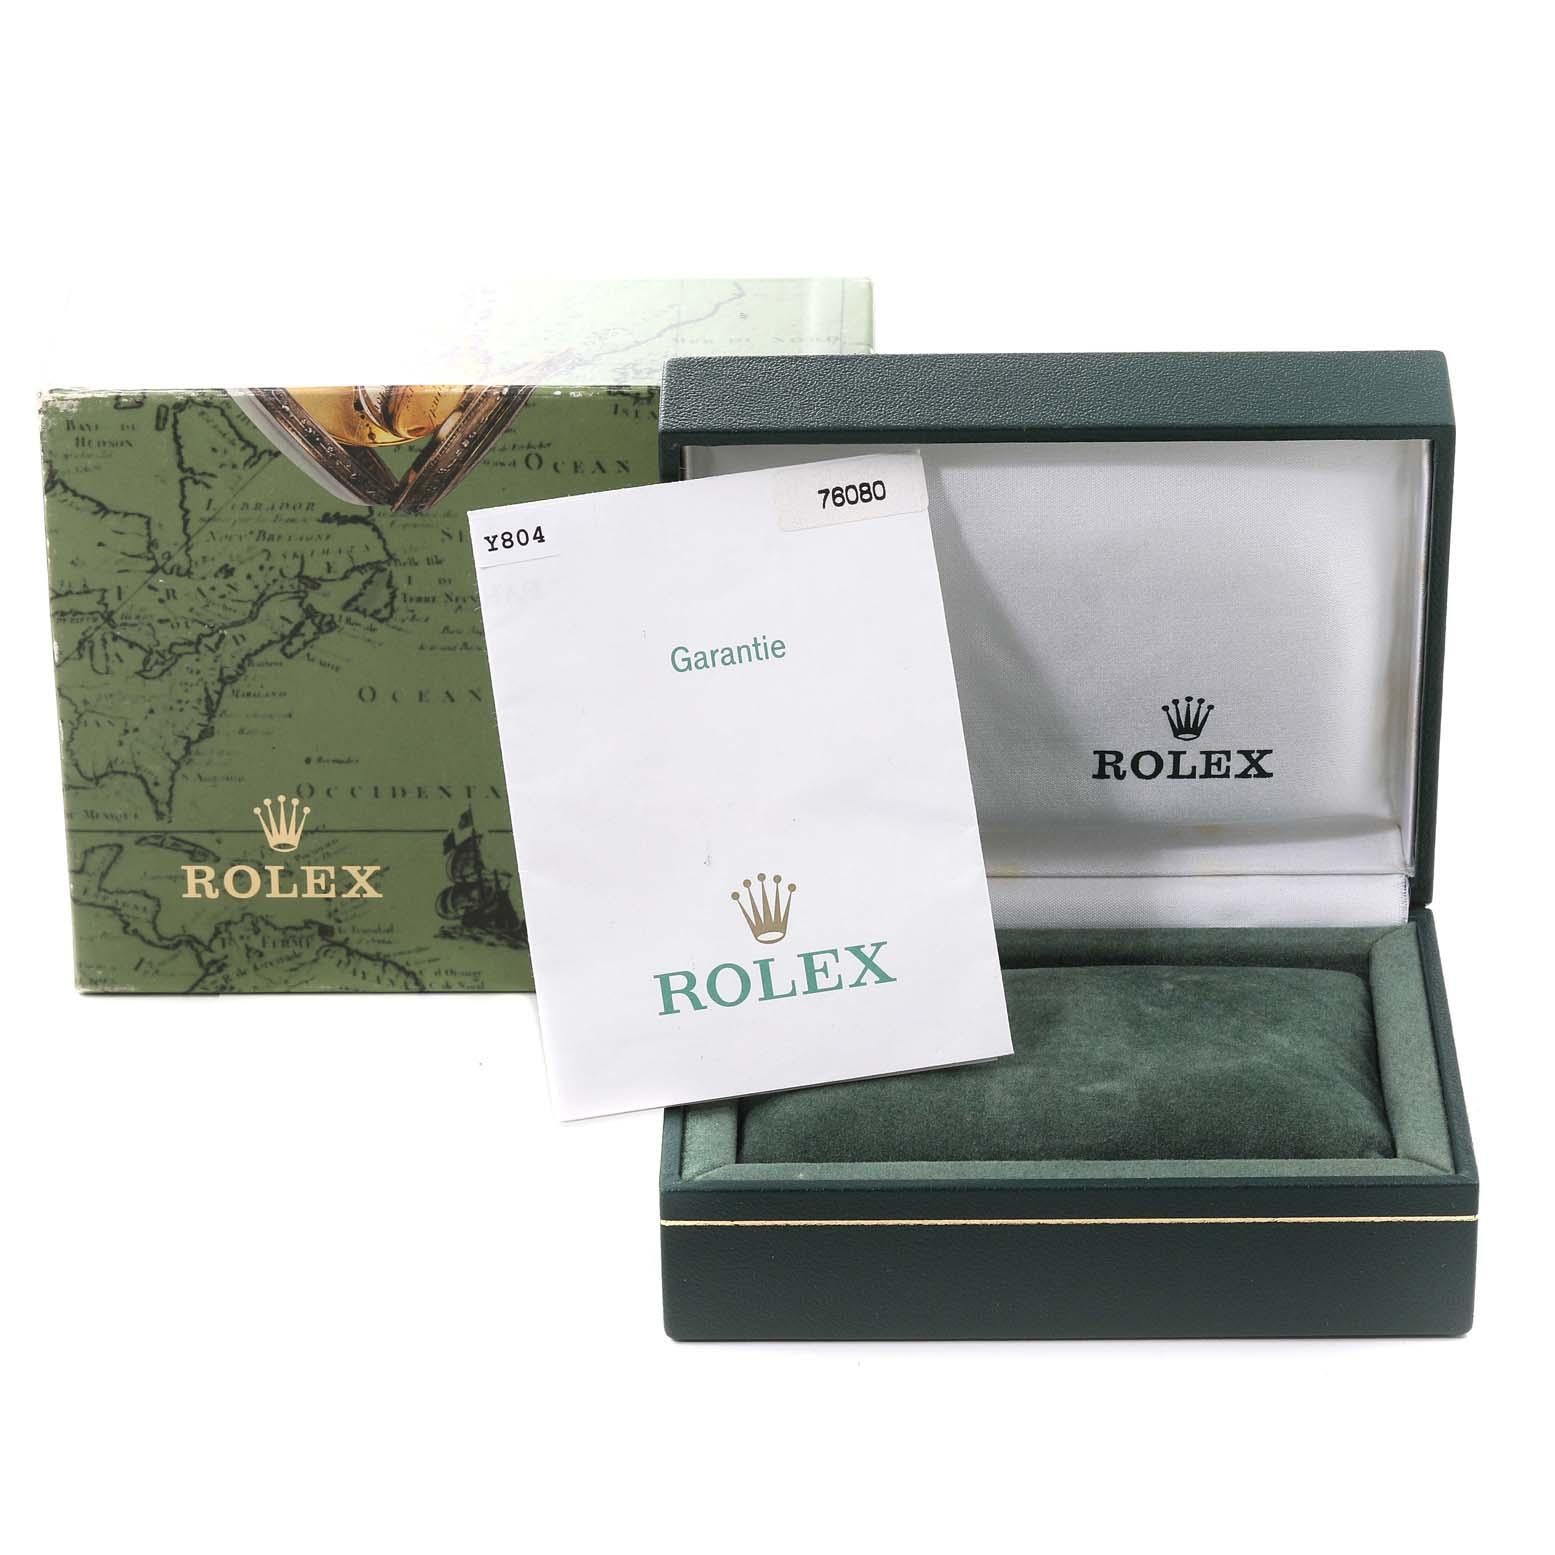 Rolex Oyster Perpetual Salmon Dial Steel Ladies Watch 76080 Box Papers 8